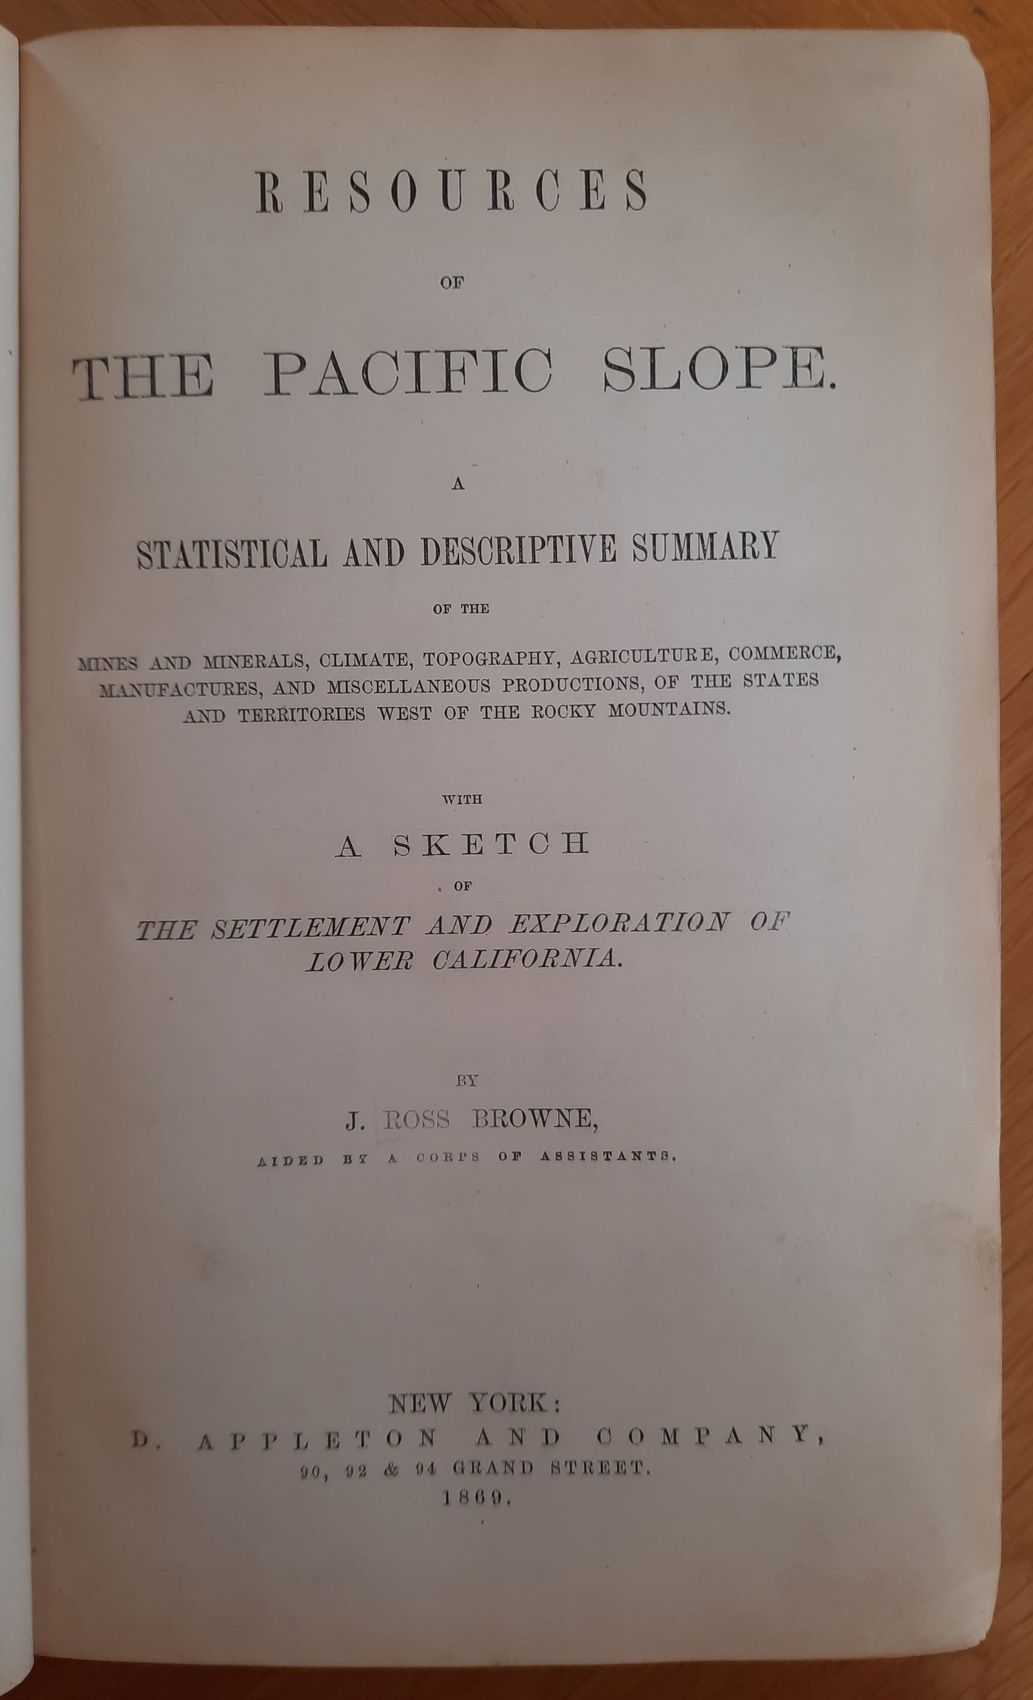 BROWNE, J. ROSS: - Resources of the Pacific Slope. A Statistical and Descriptive Summary of the Mines, Minerals, Climate, Topography. Agriculture, Commerce, Manufactures, and Miscellaneous Productions, of the States and Territories West of the Rocky Mountains with a Sketch of The Settlement and Exploration of Lower California..